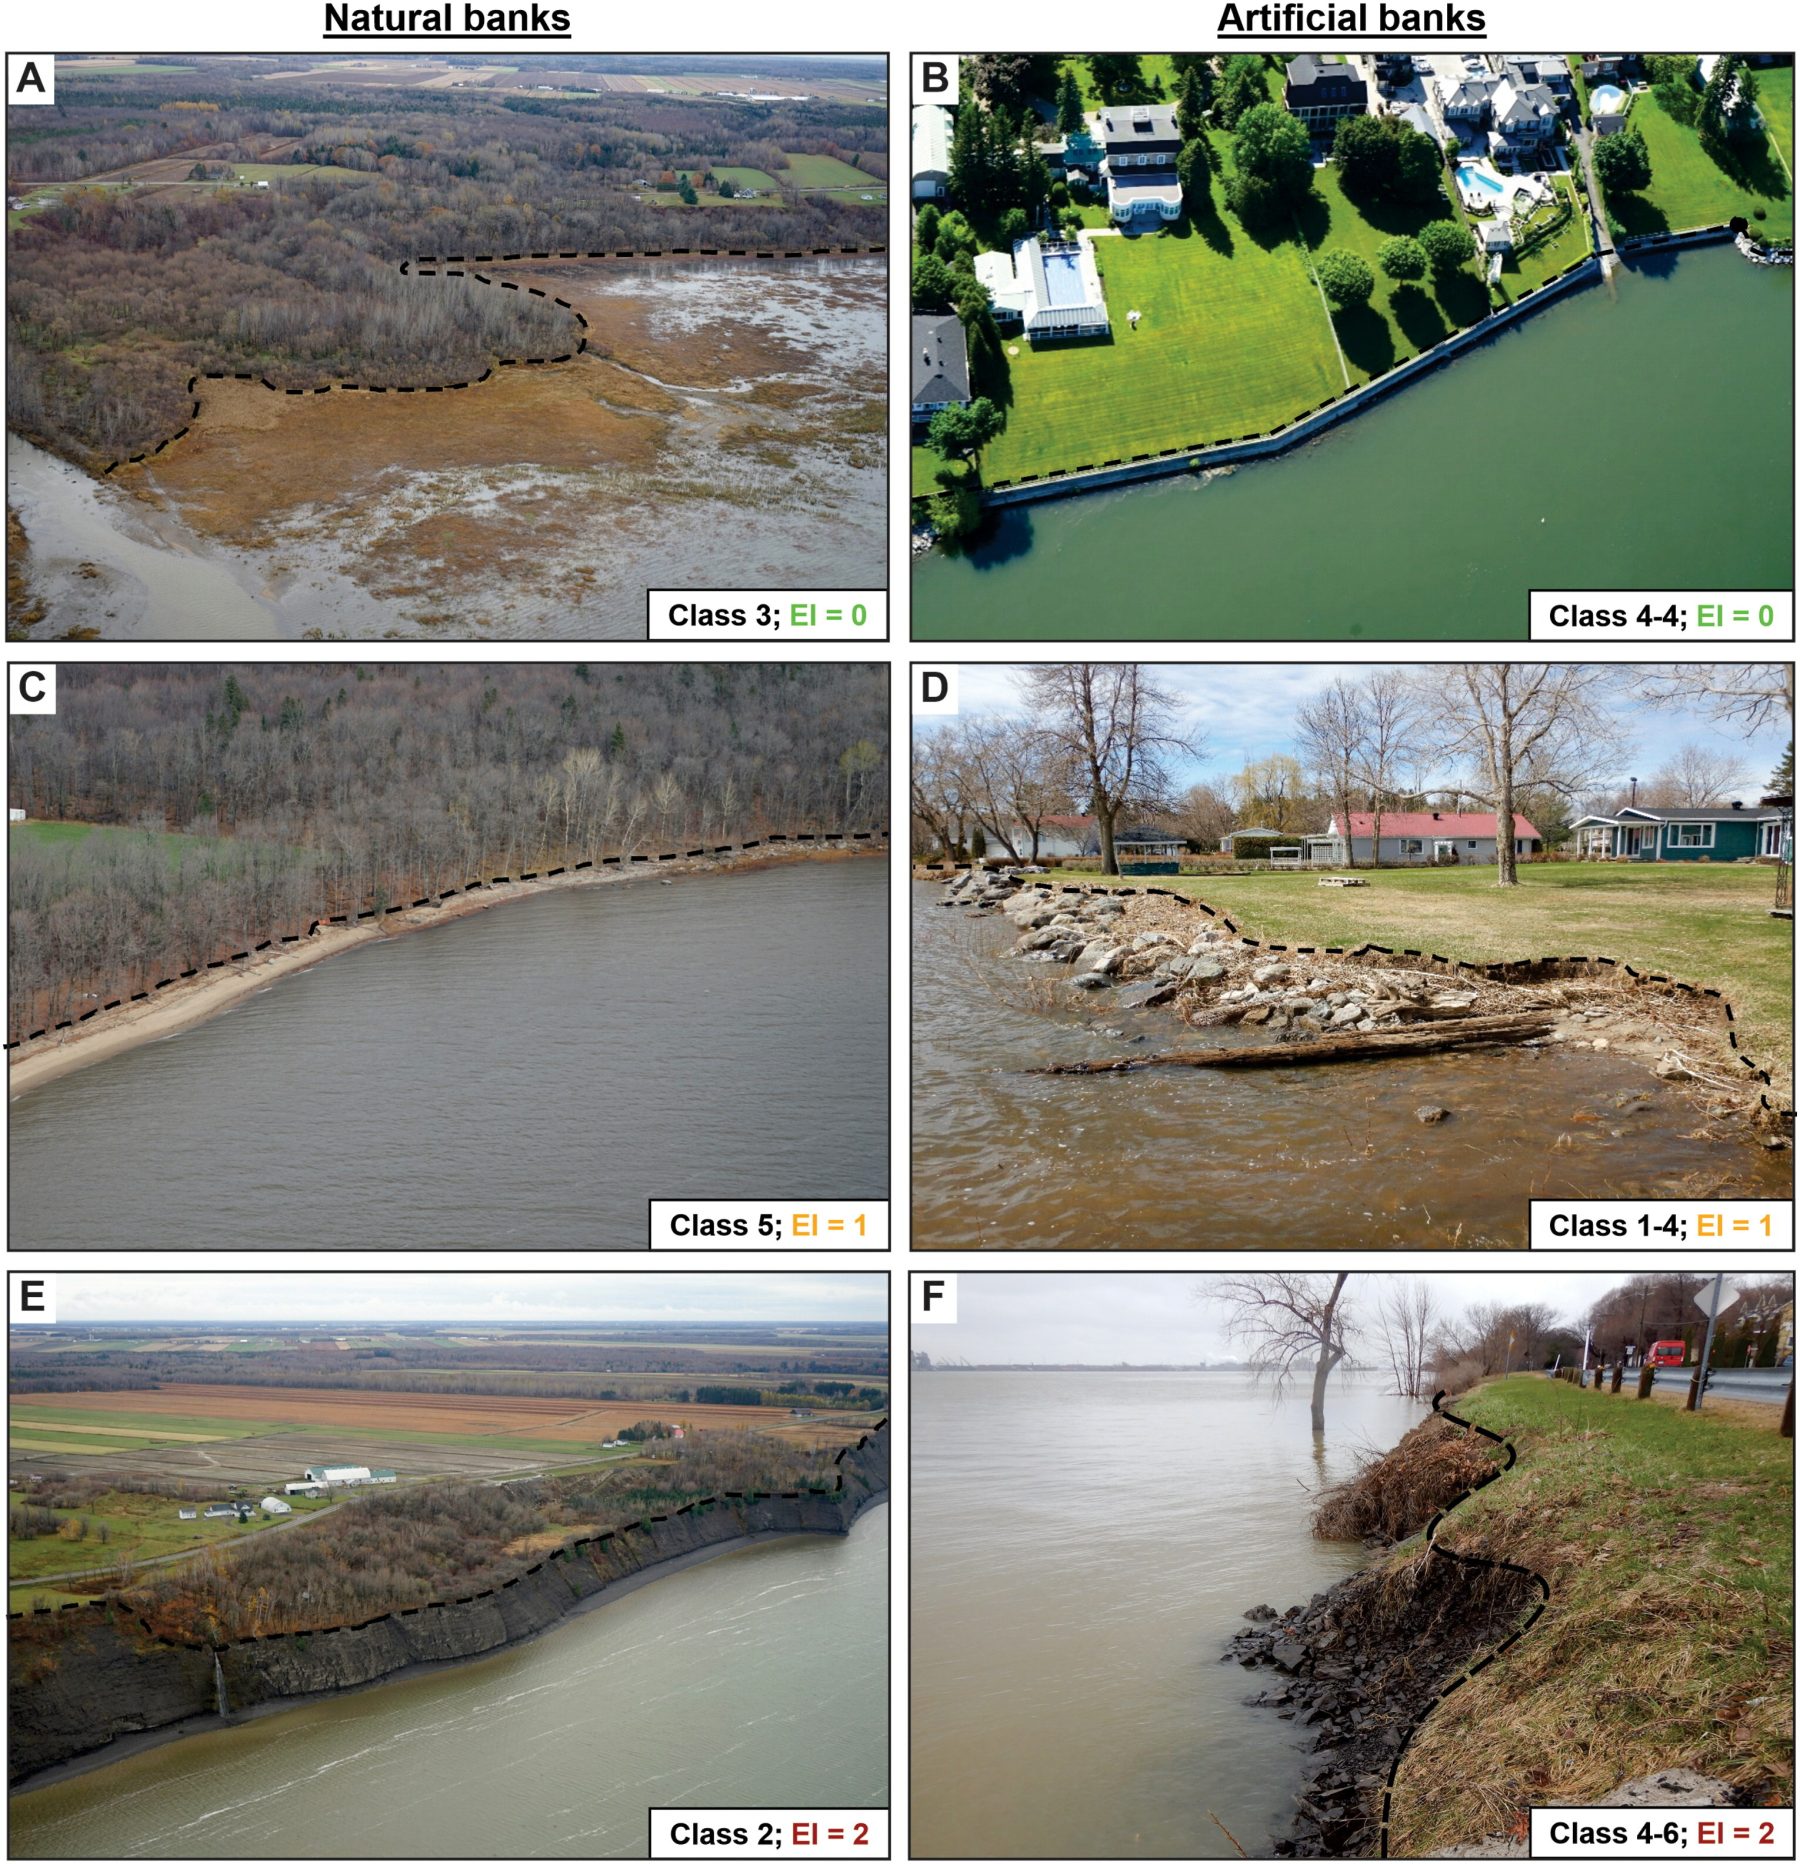 The image includes 6 photographs. 3 different natural riverbanks (with sand or rocks) and 3 different artificial riverbanks (with embankments or low walls) are represented.